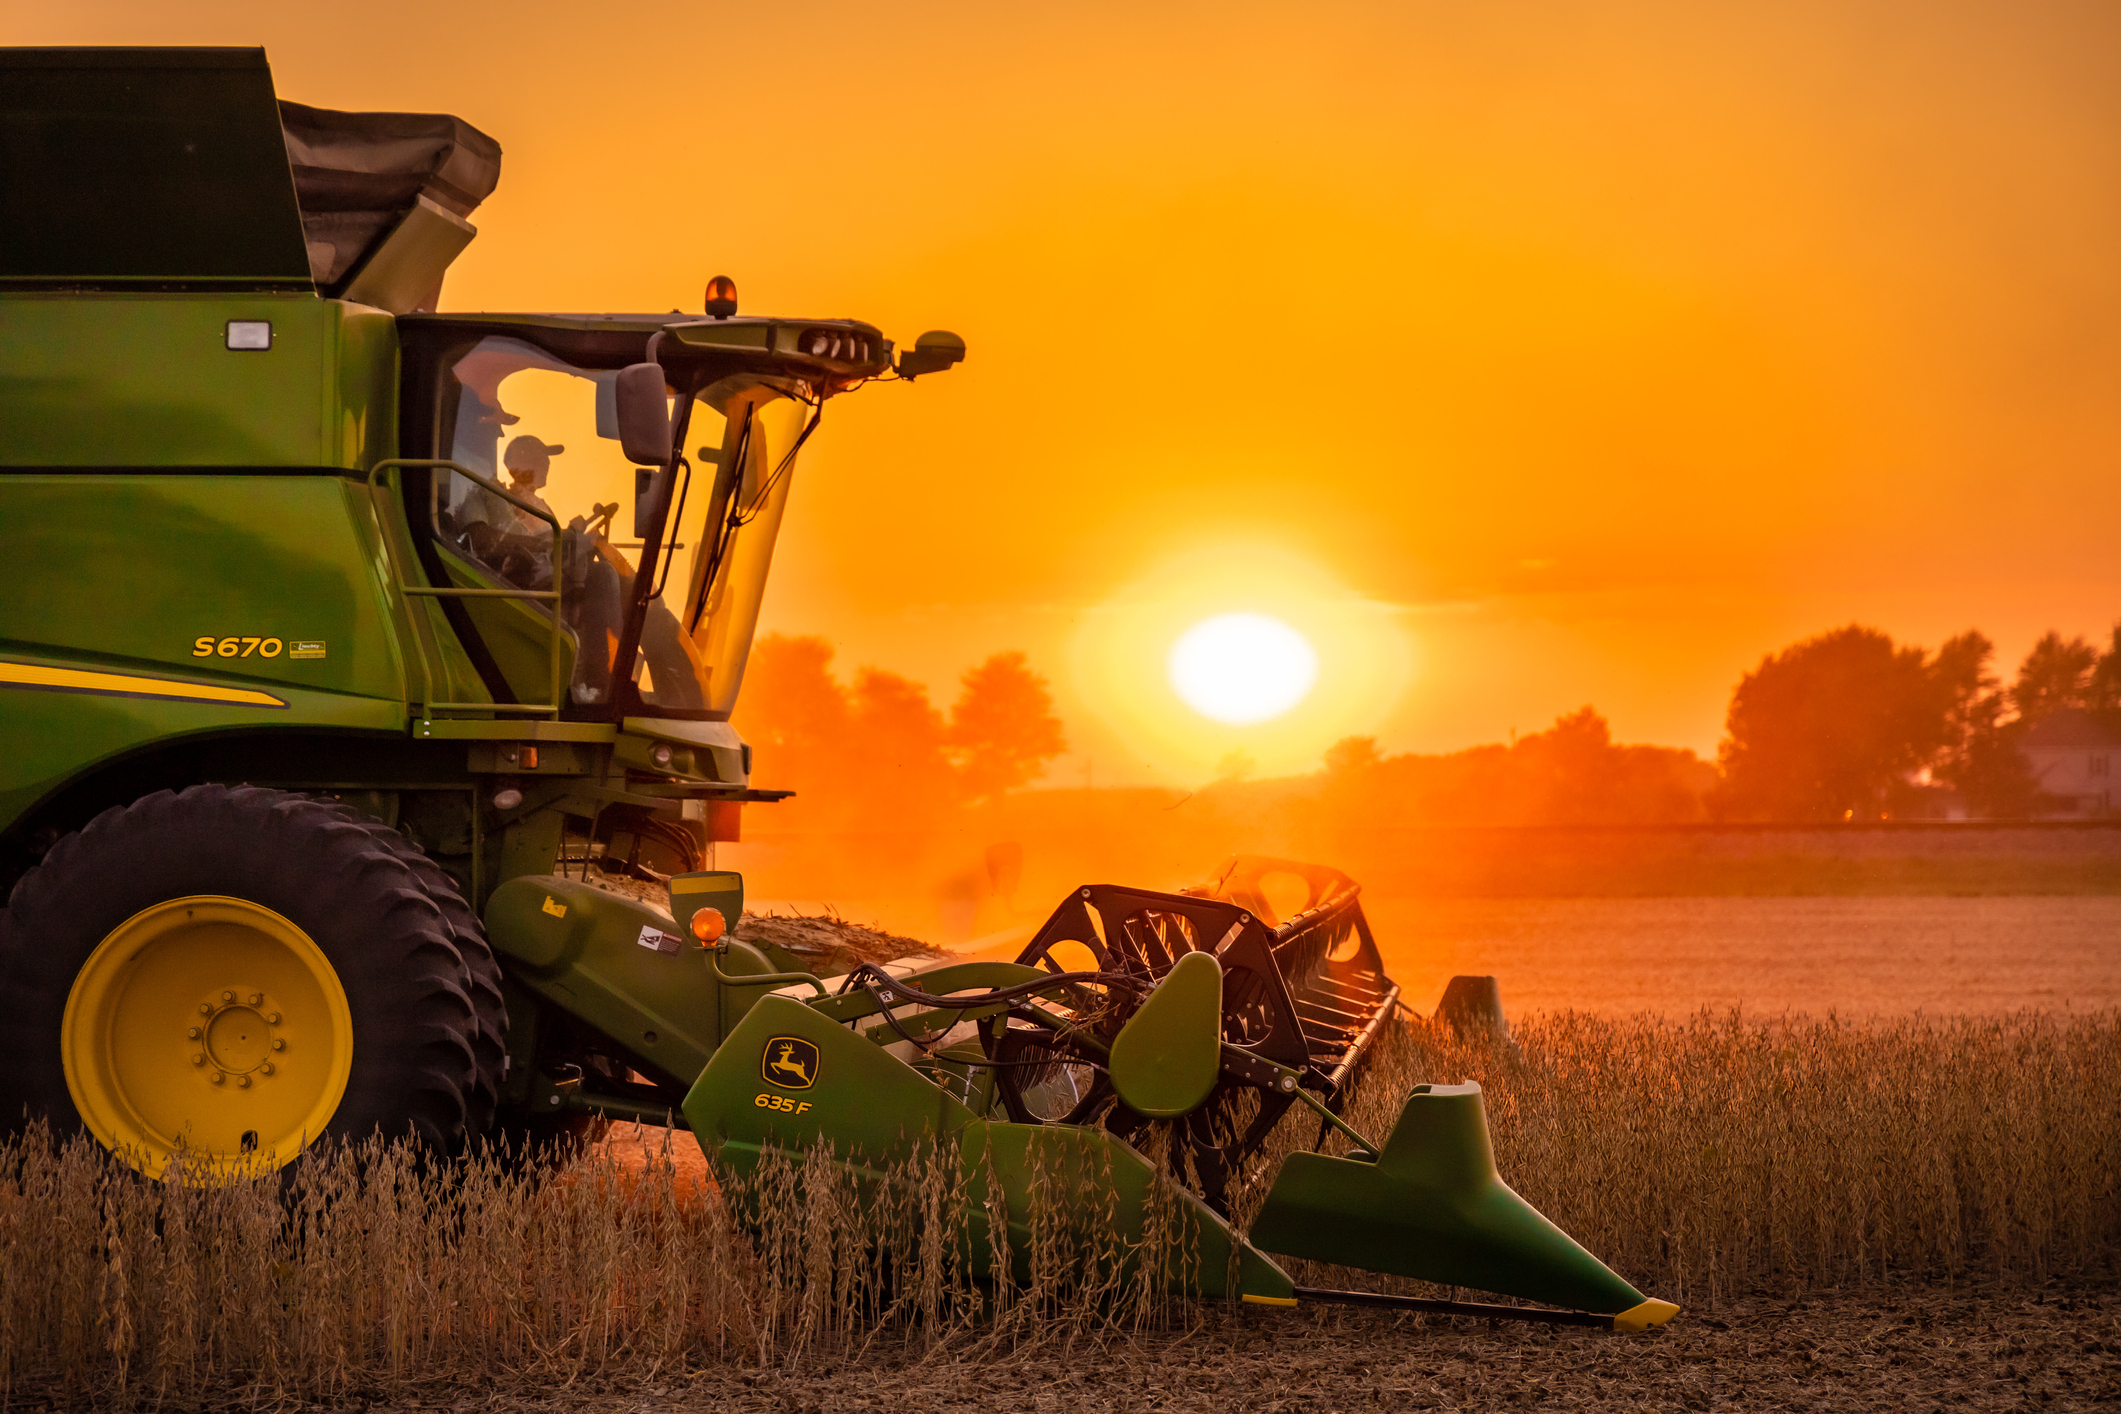 Farmer on green harvesting machinery as the sun sets